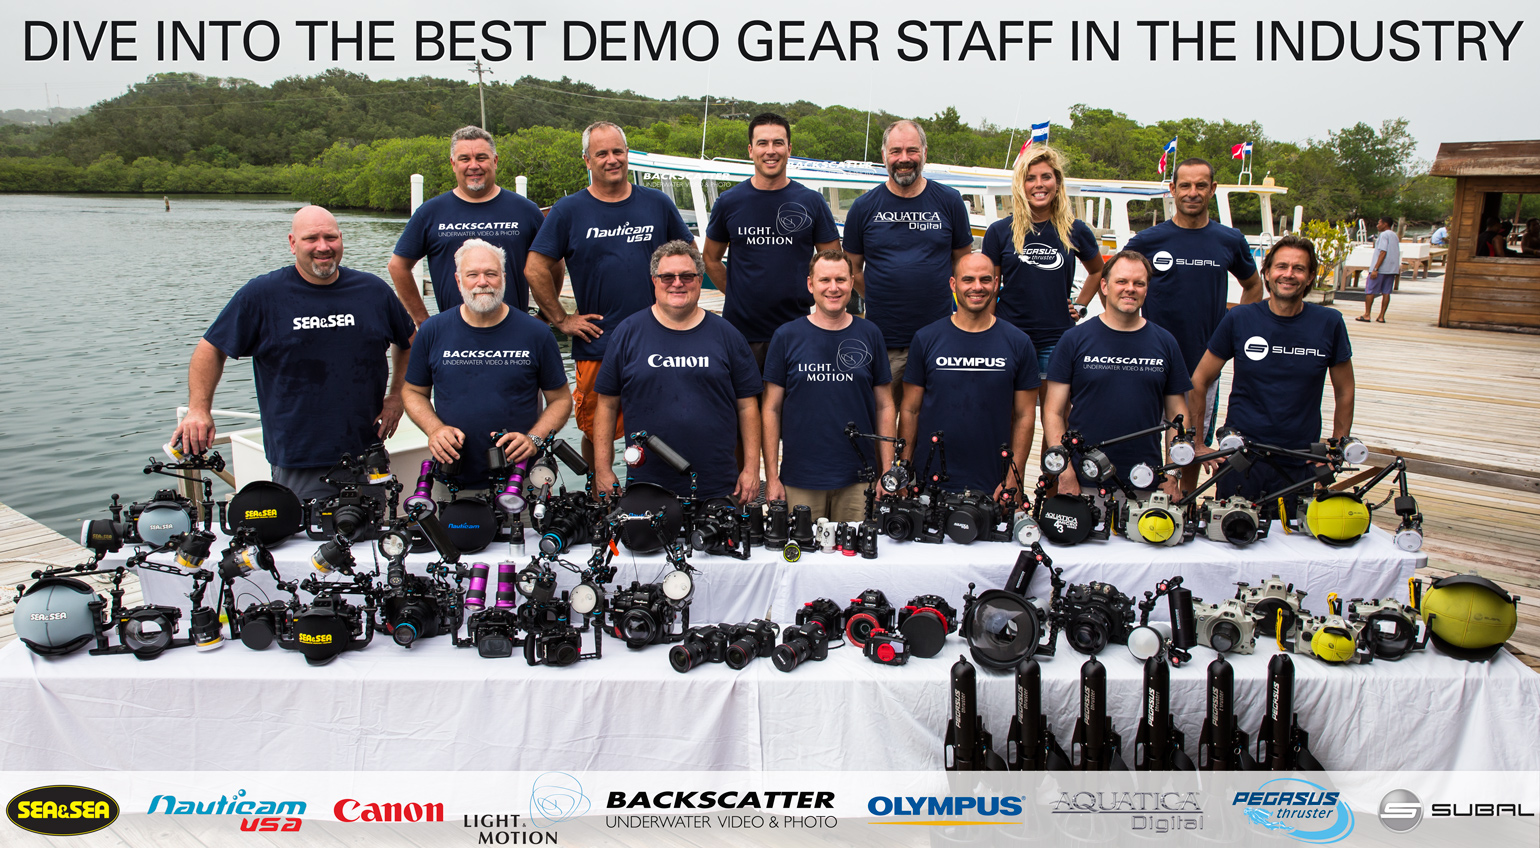 The Digitial Shootout Demo Gear and Tech Support Staff